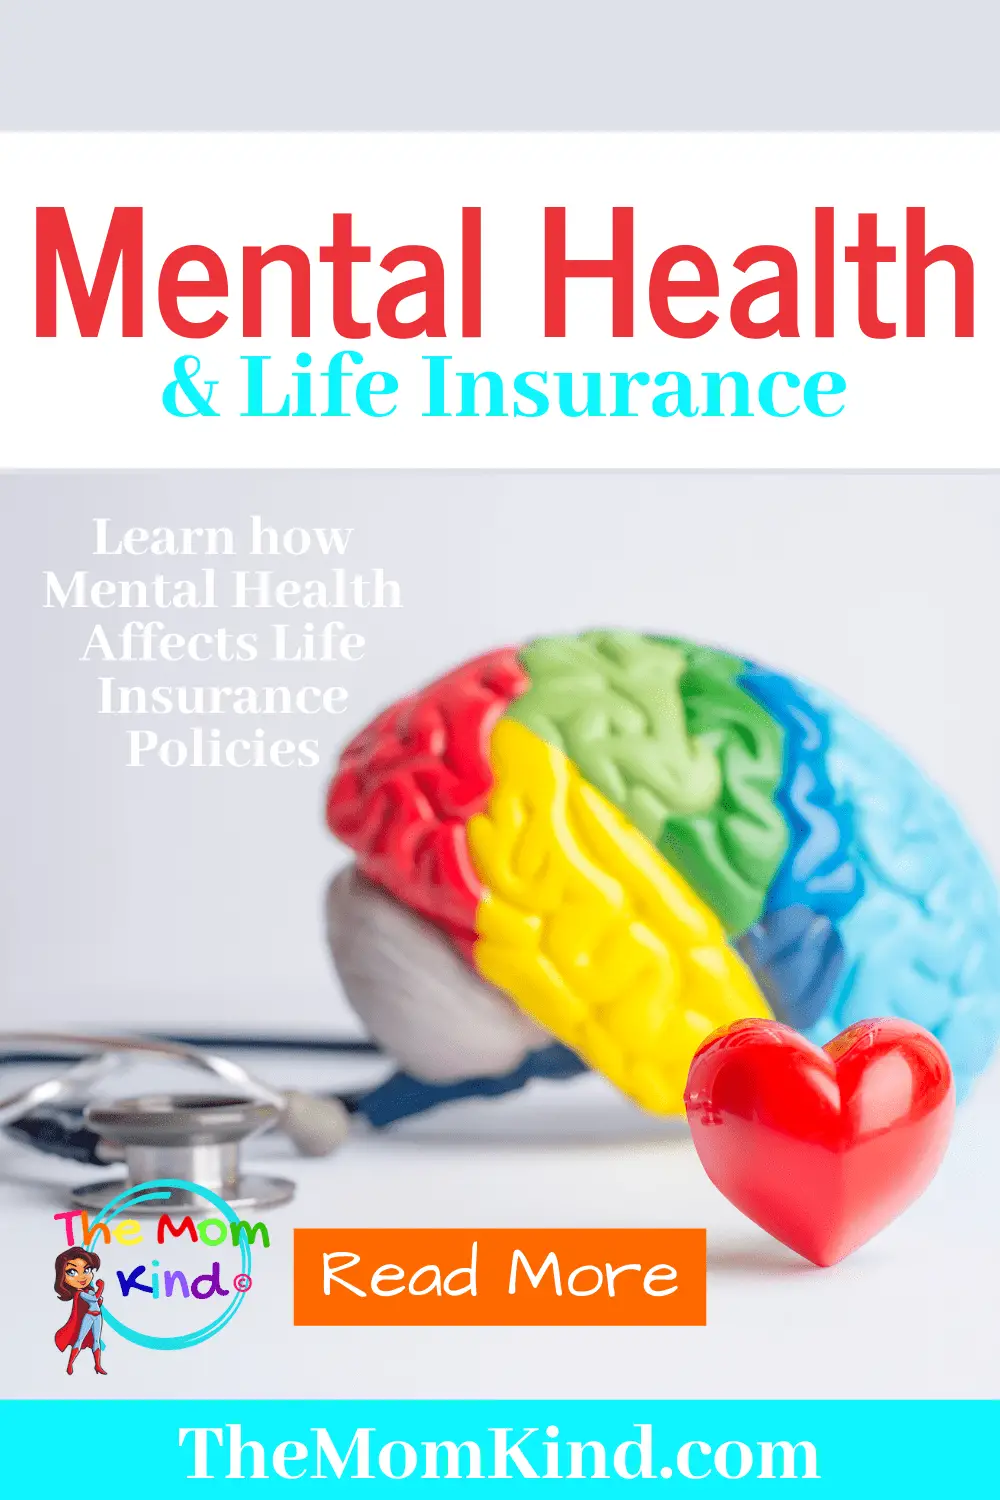 Does Mental Health Affect Life Insurance Policies?